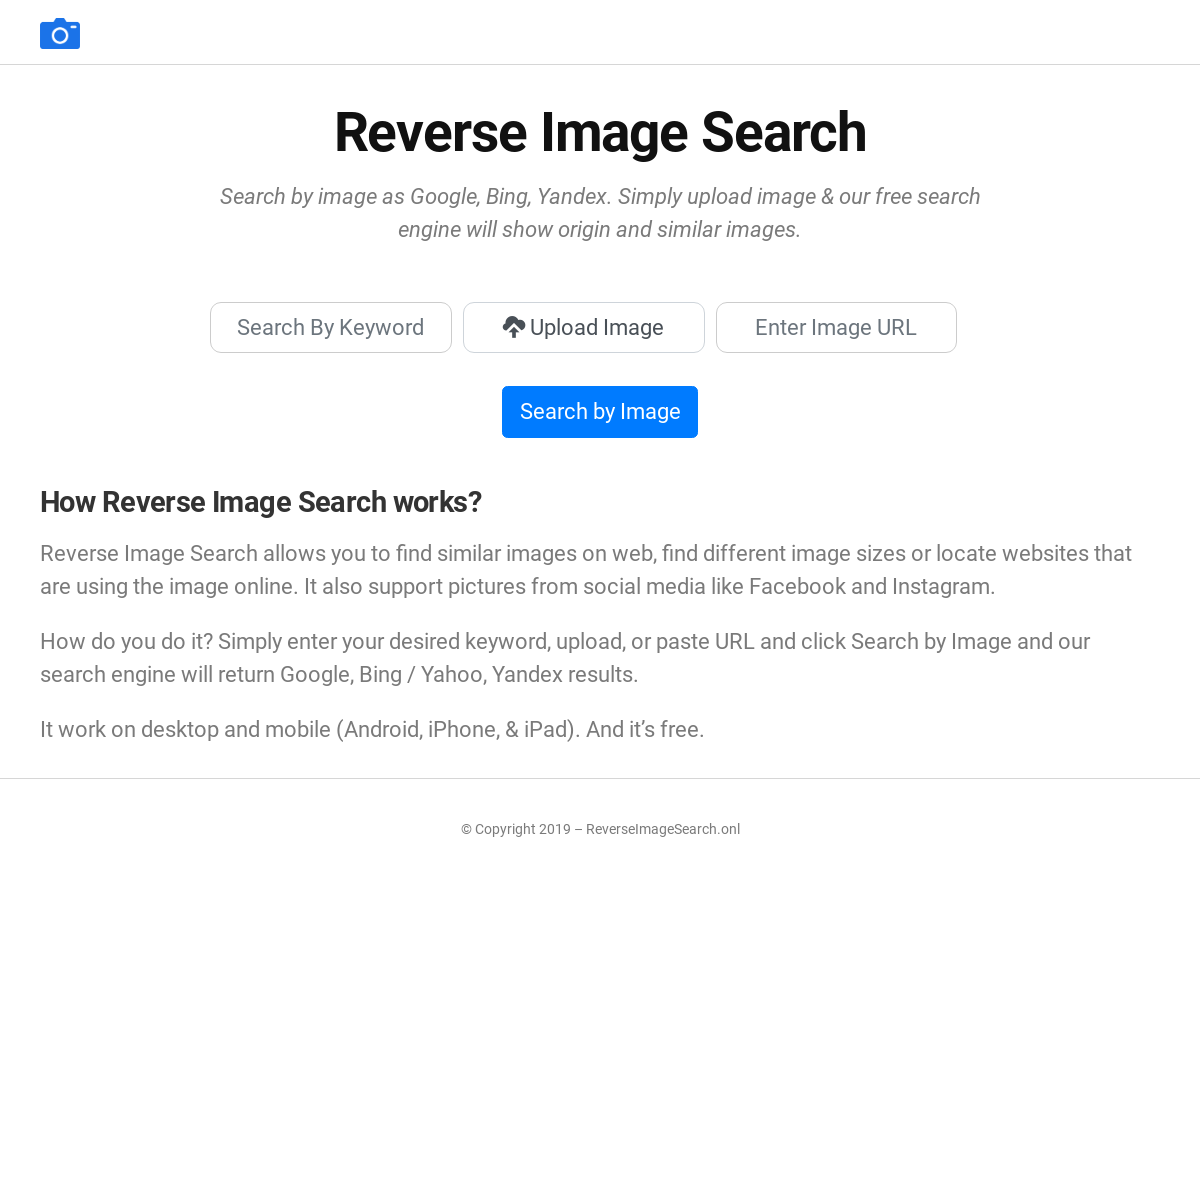 A complete backup of reverseimagesearch.onl